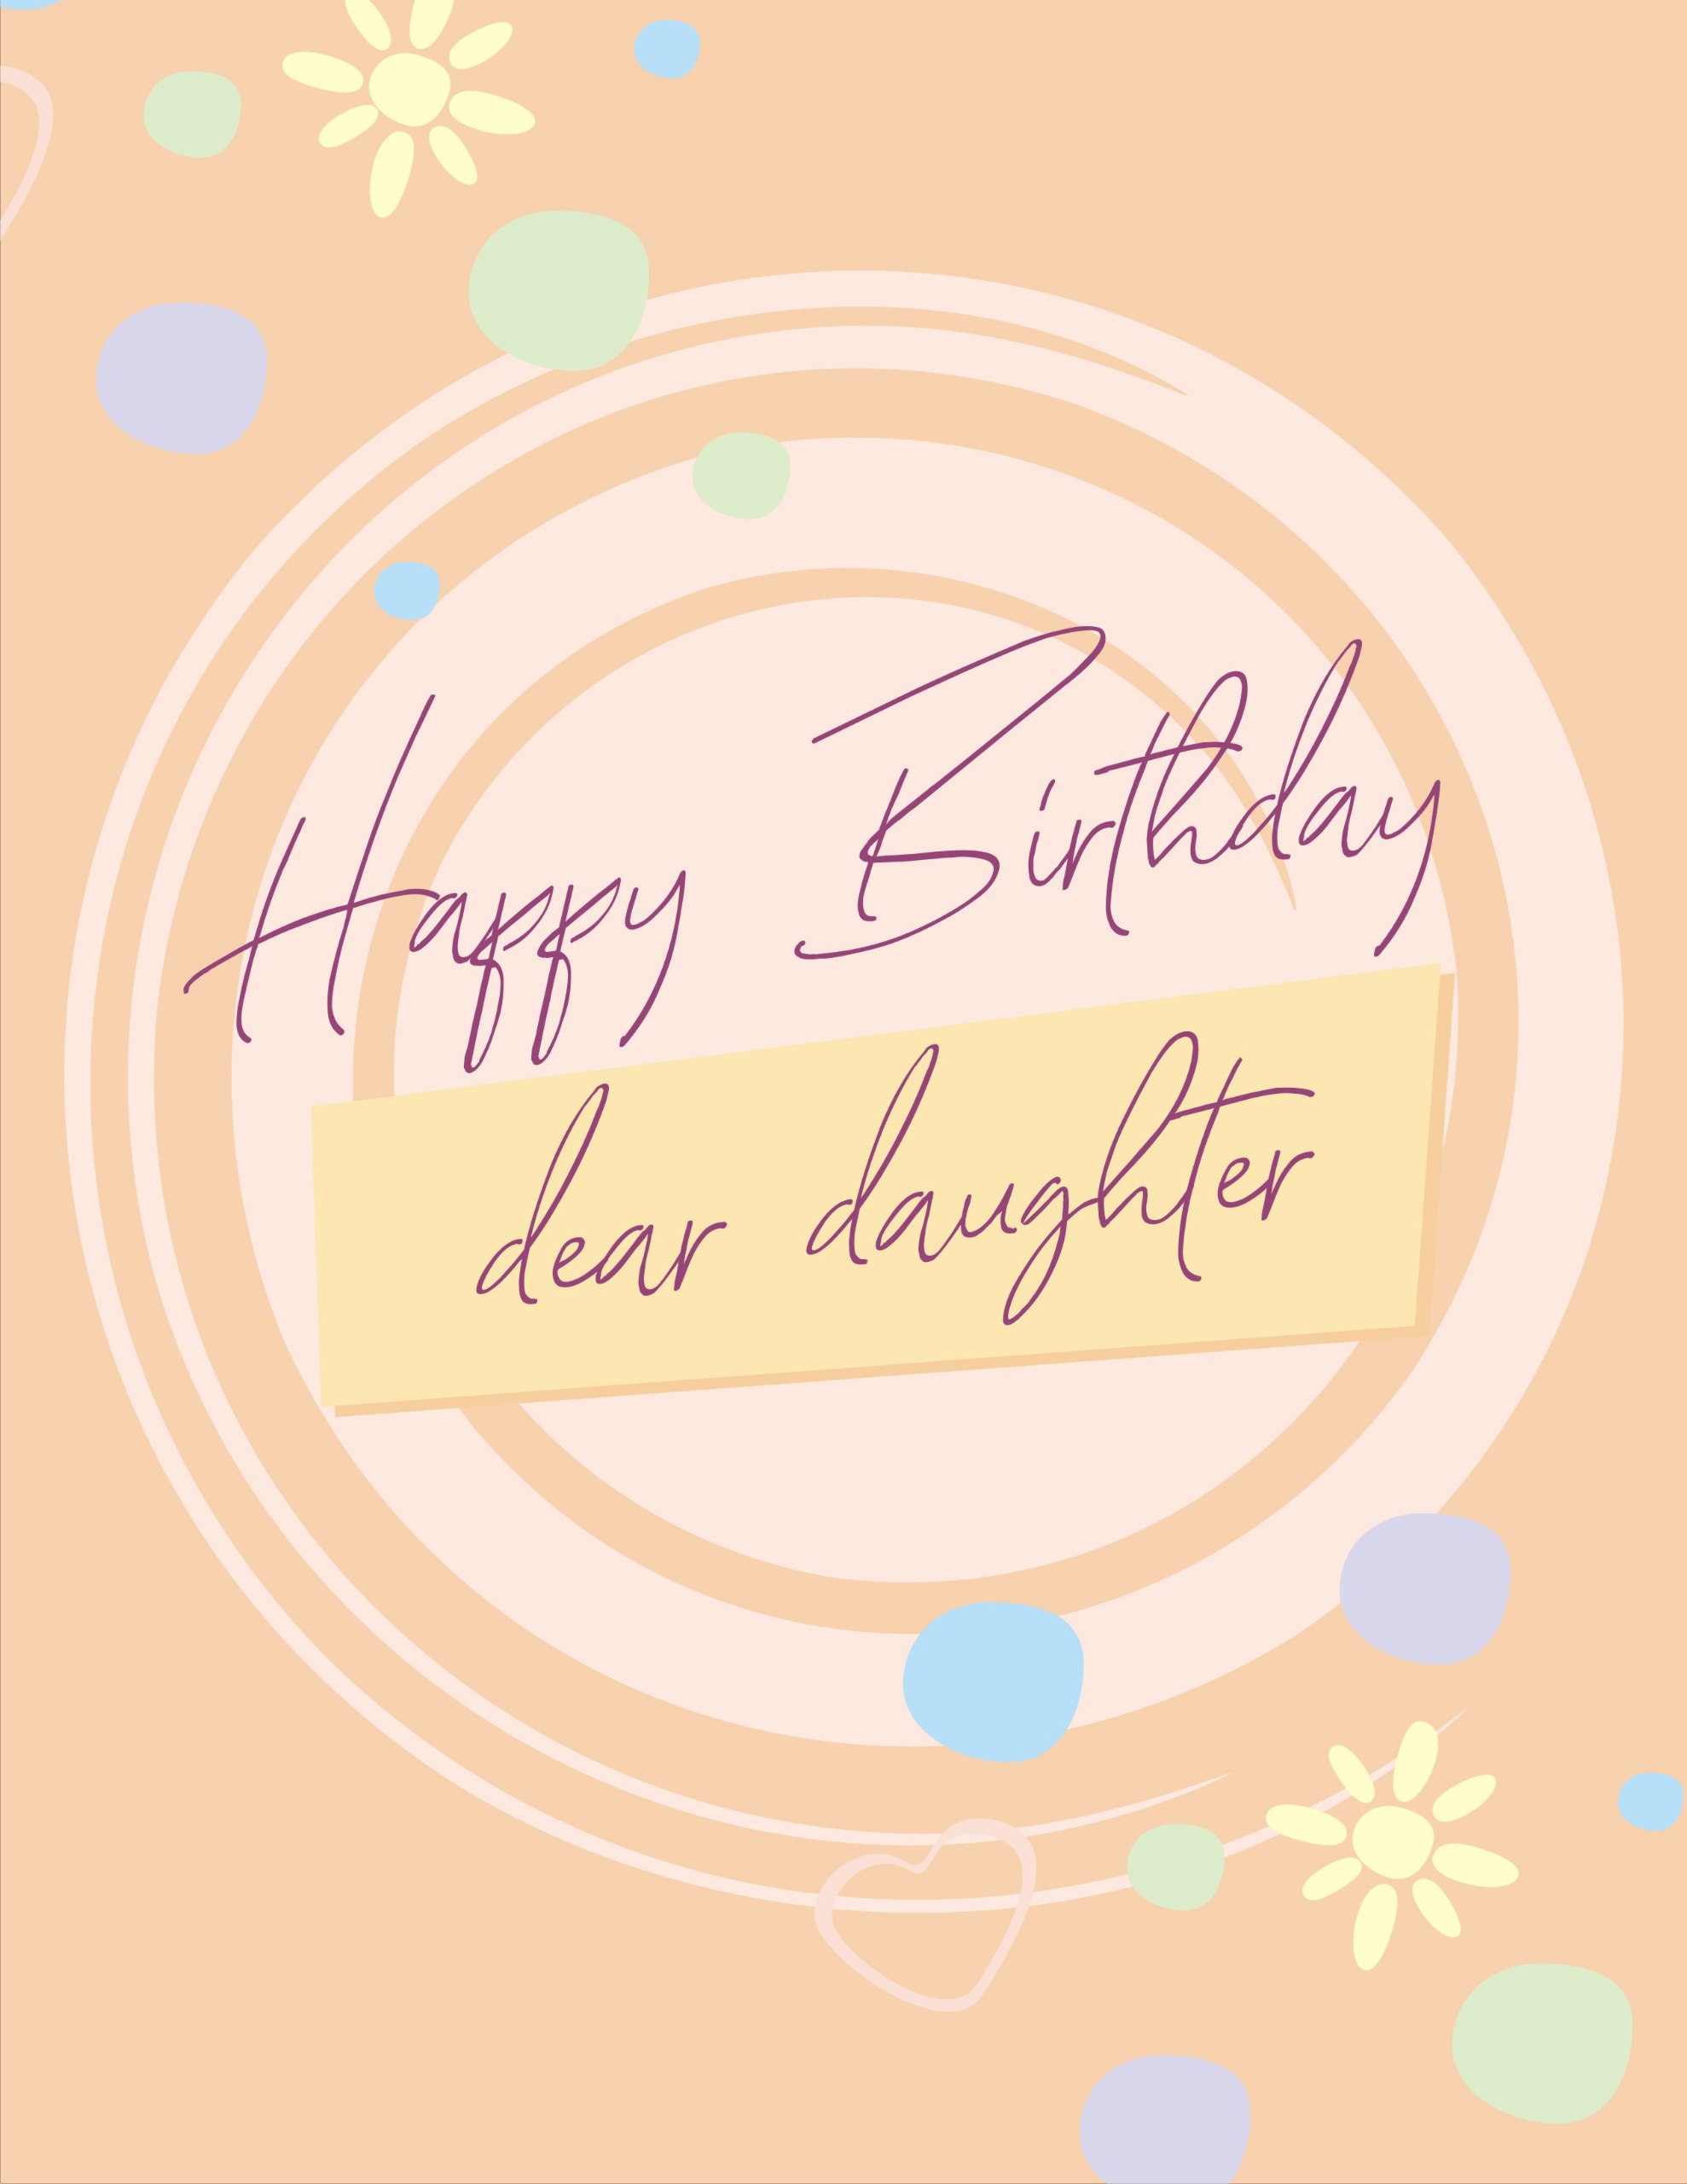 Free Free Happy Birthday Wishes and Images for Daughter - birthdayimg.com